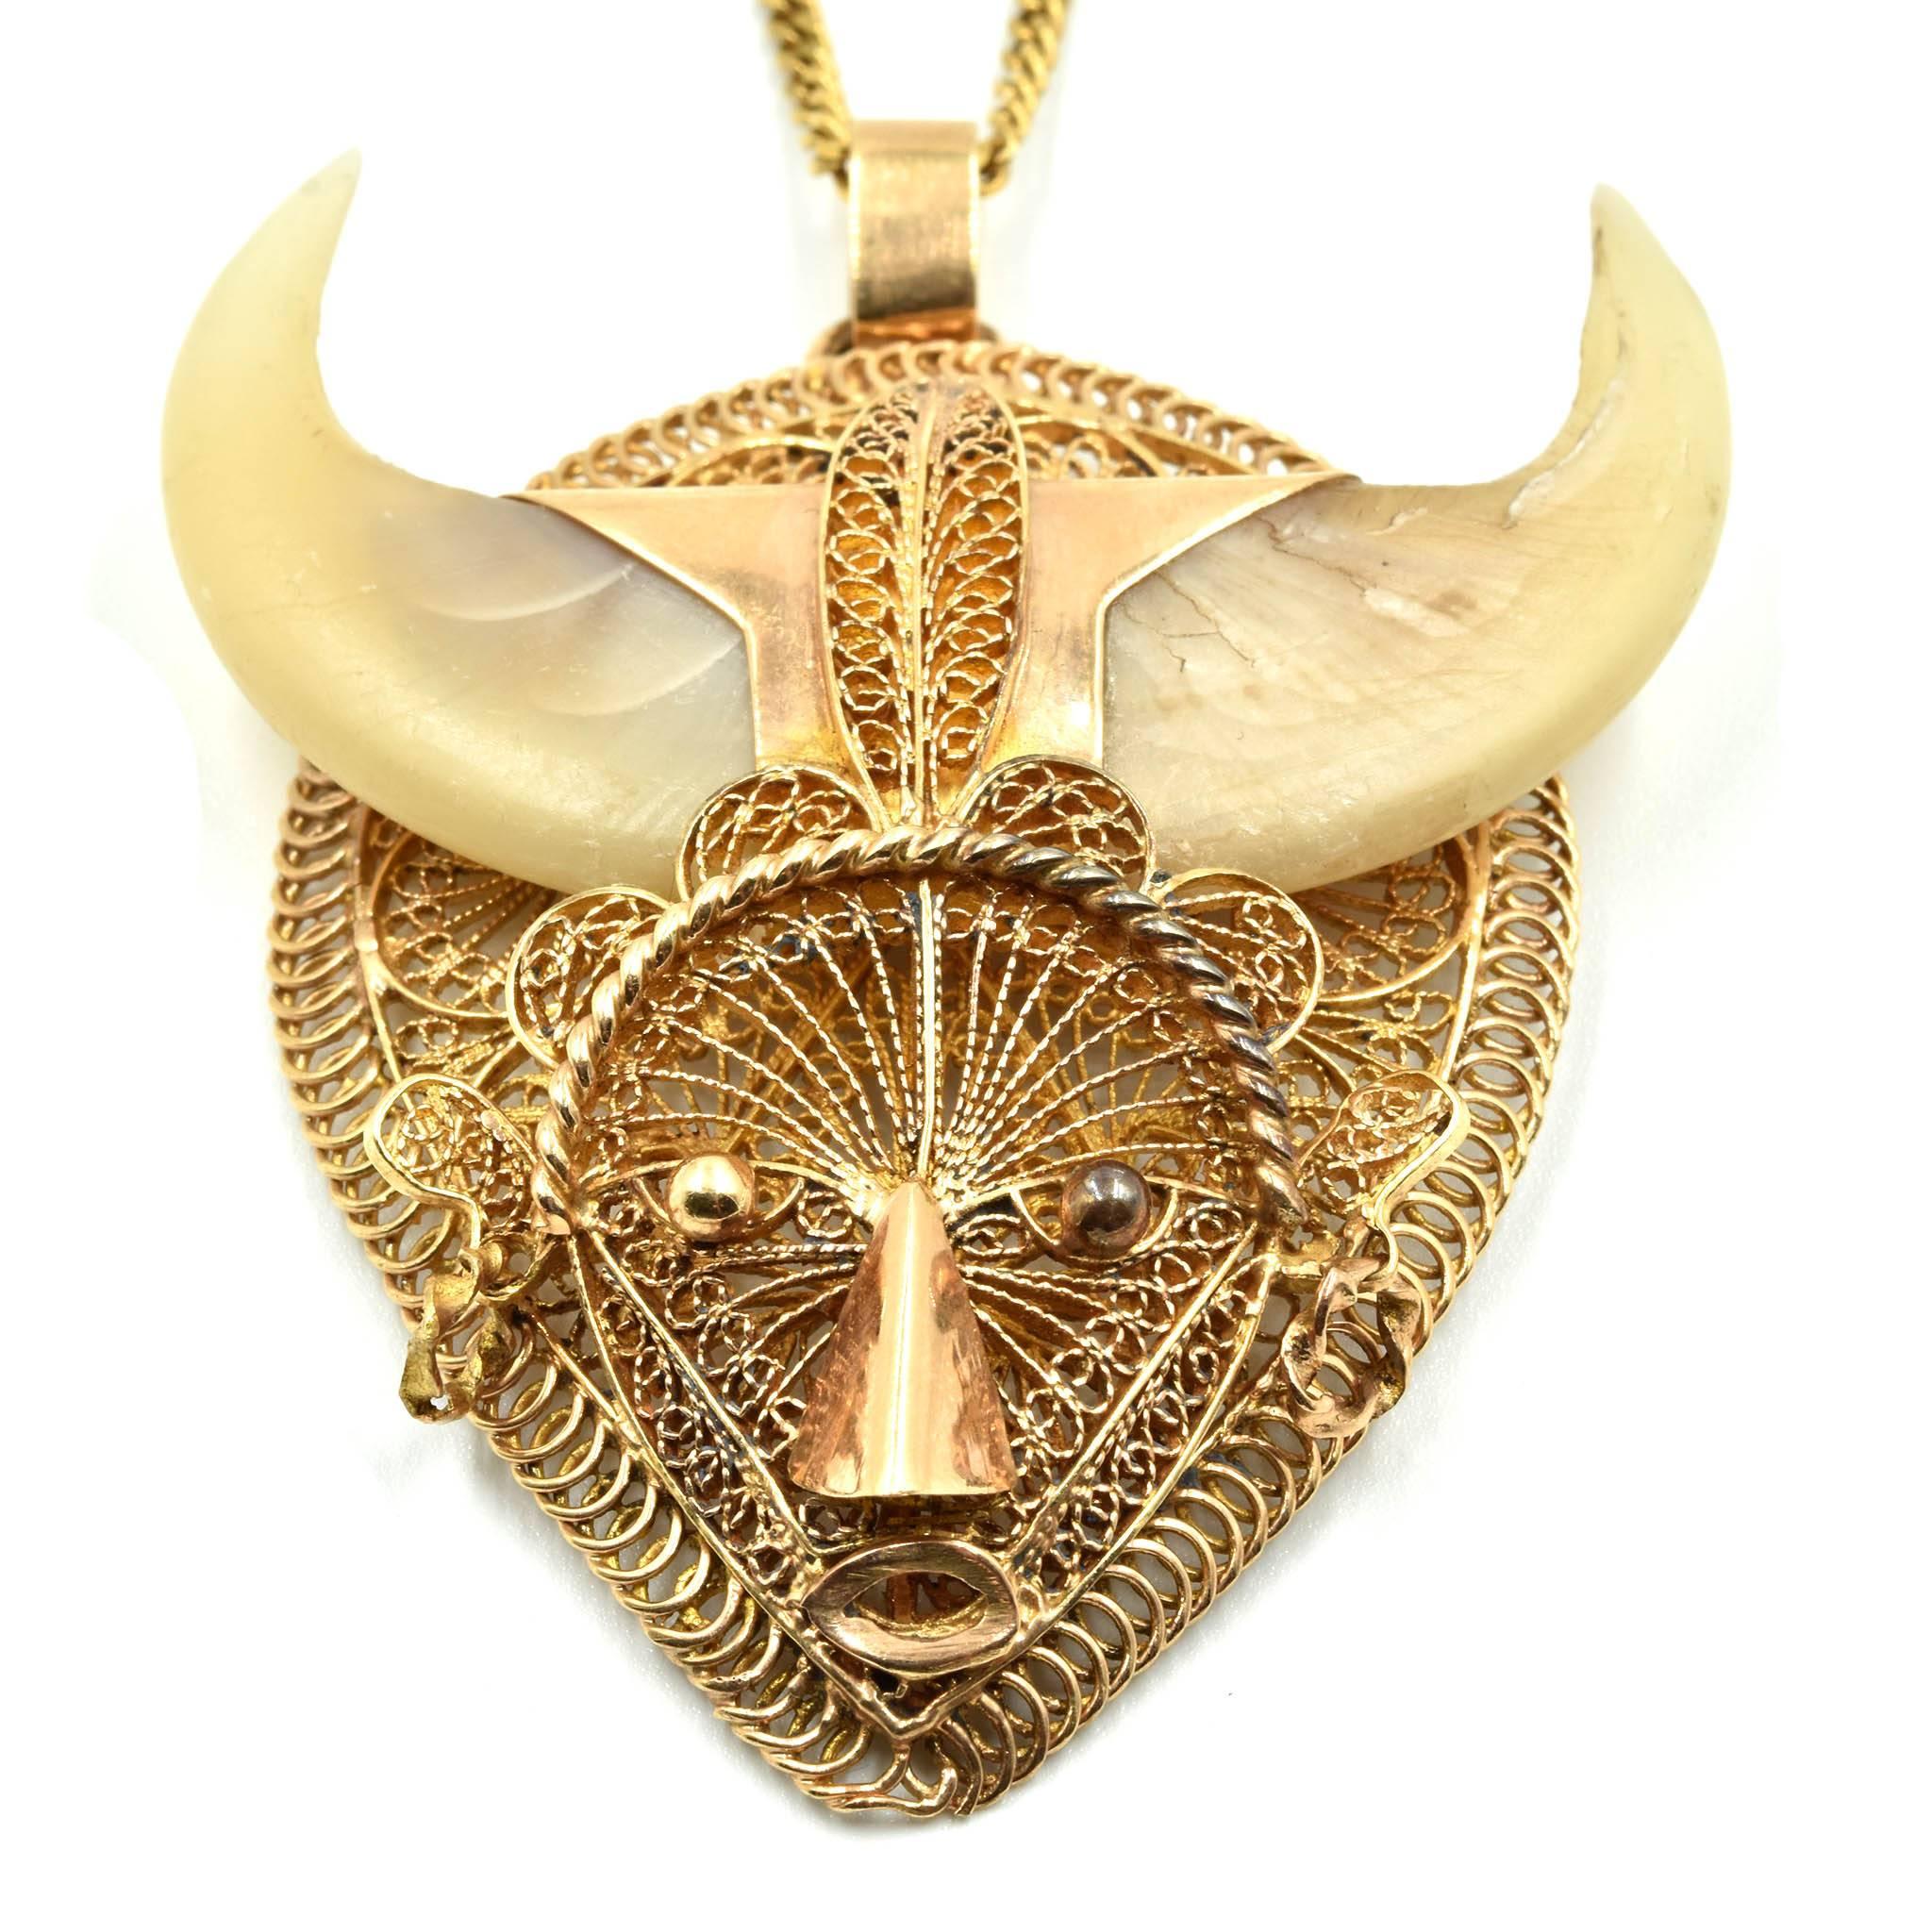 Vintage Tribal Pendant Necklace 14 Karat Yellow Gold In Excellent Condition For Sale In Scottsdale, AZ